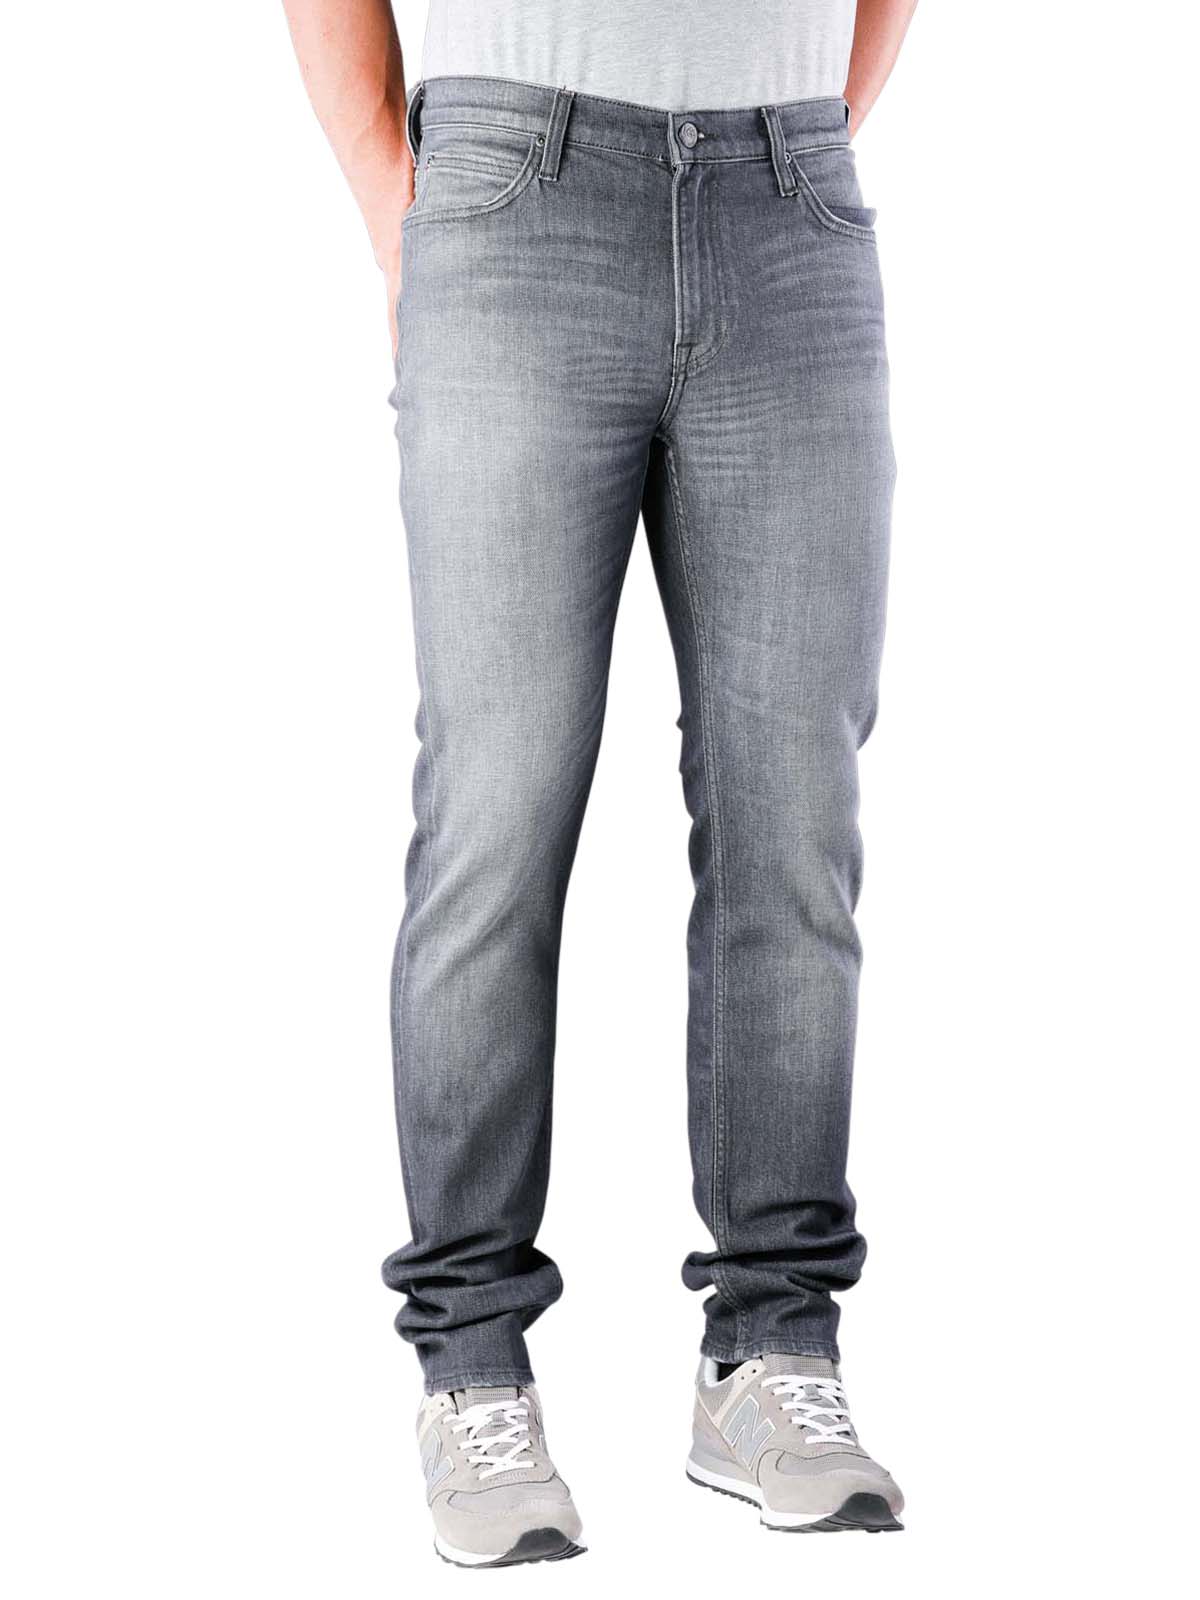 Lee Ryder Jeans grey used Lee Men's Jeans | Free Shipping on  -  SIMPLY LOOK GOOD